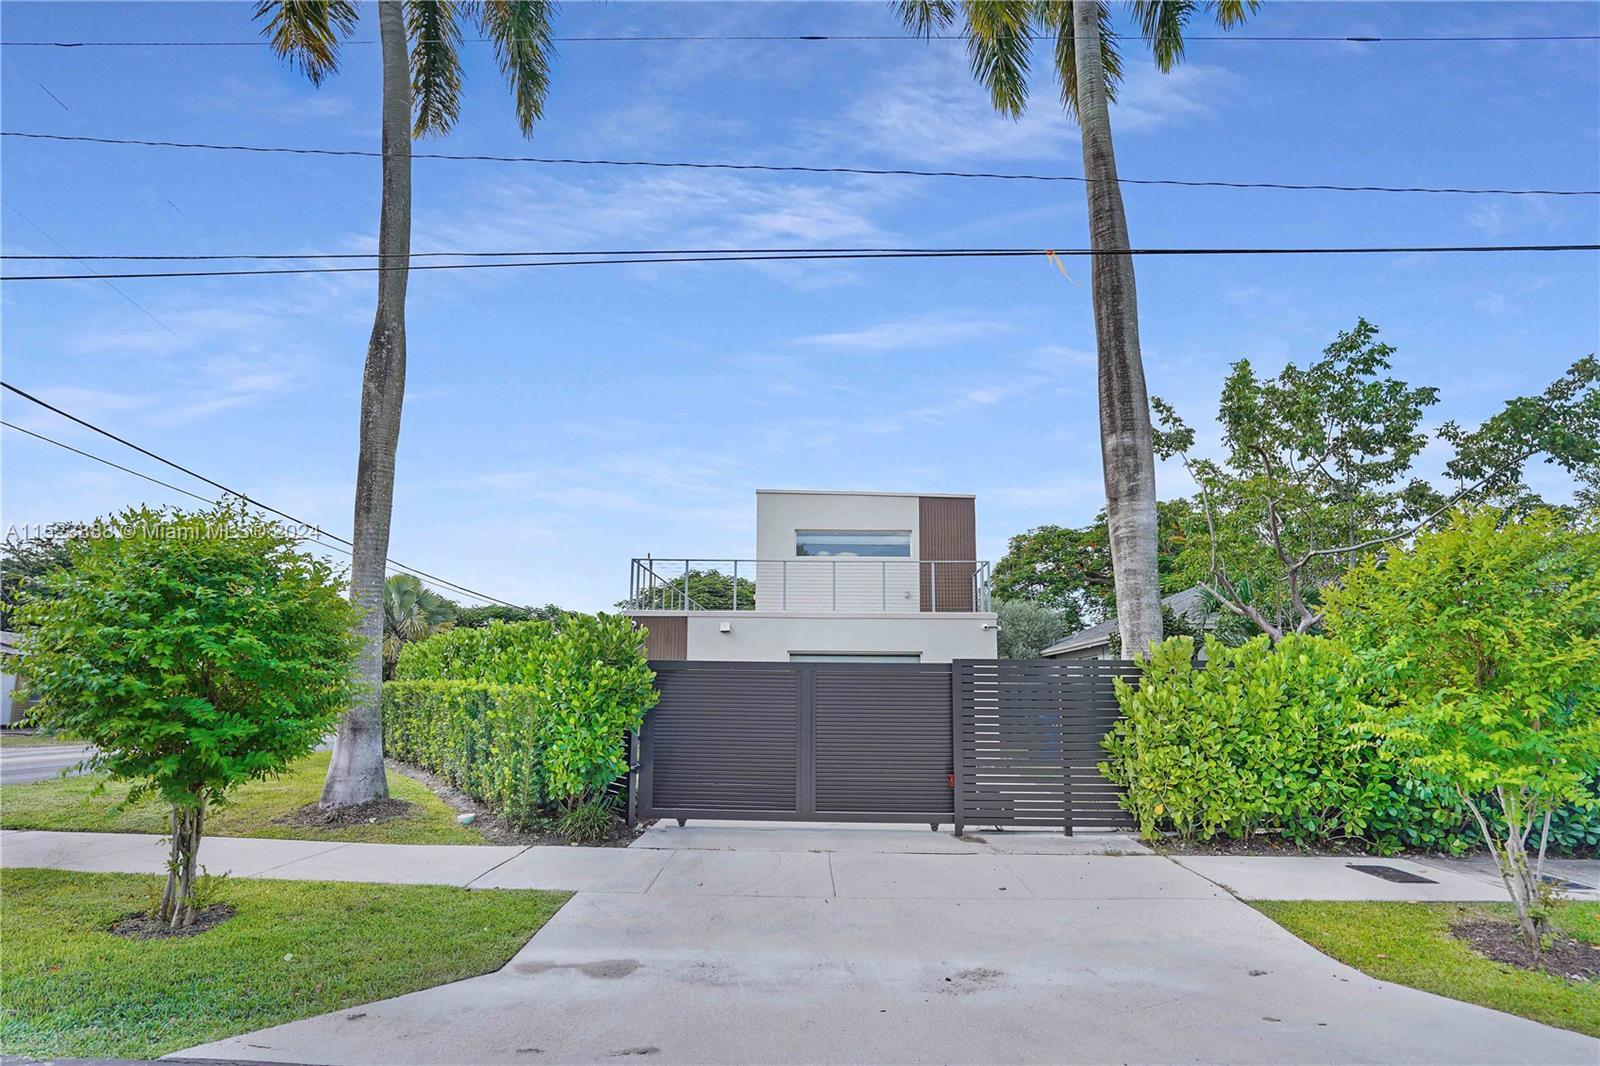 Introducing a contemporary masterpiece in Ft. Lauderdale. This modern home seamlessly blends luxury 